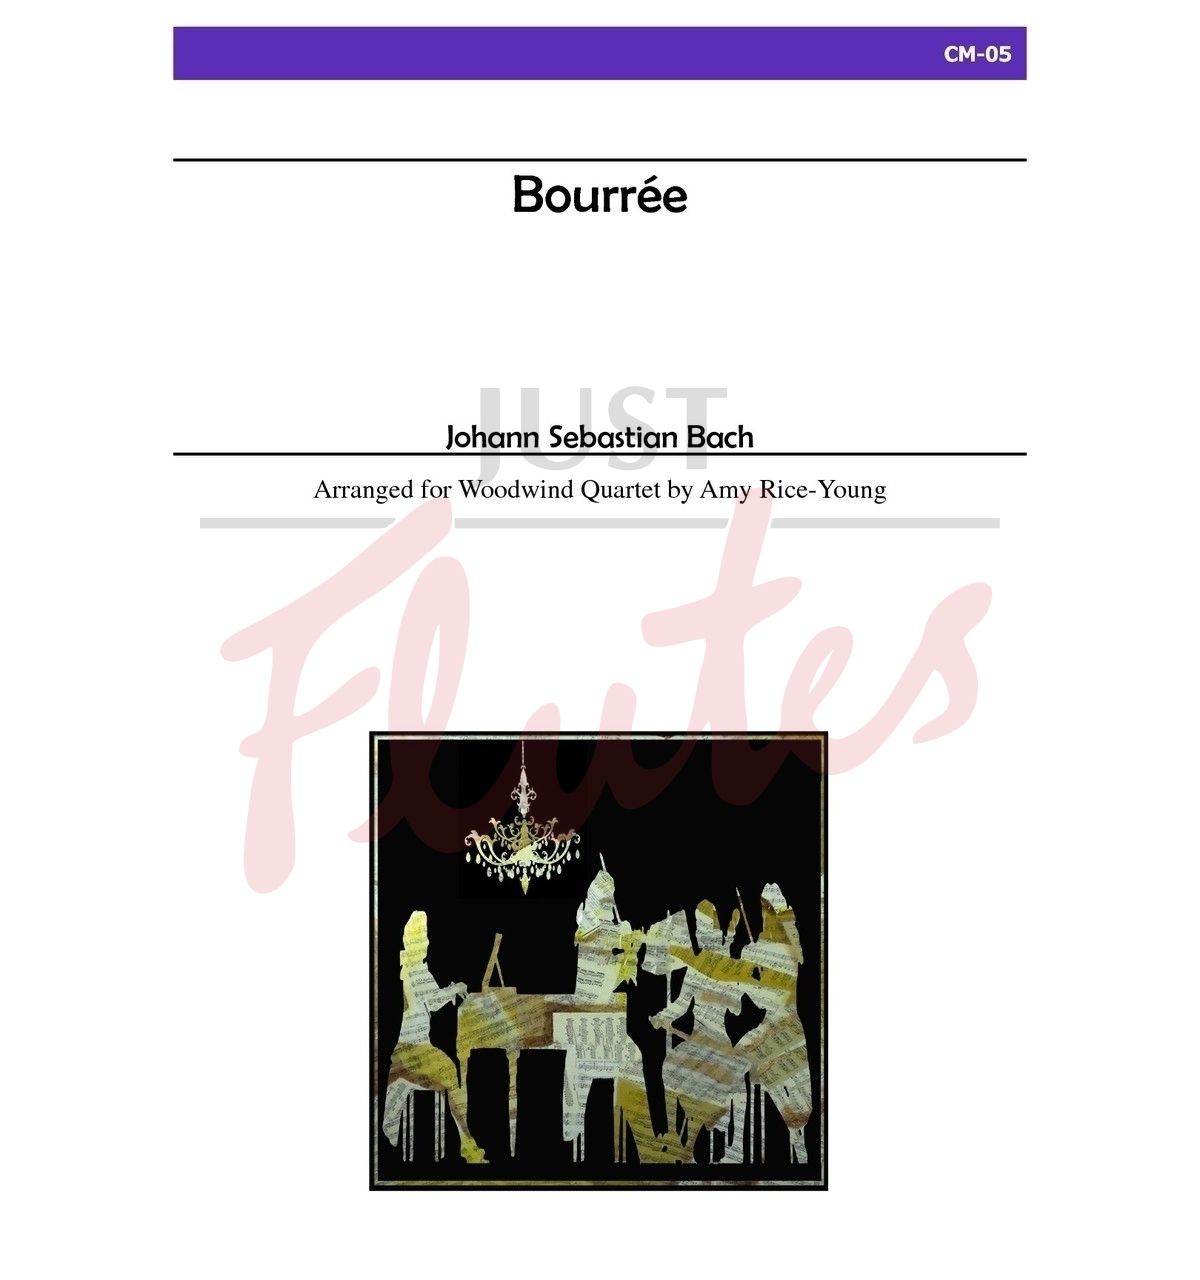 Bourrée arranged for Flute, Oboe, Clarinet and Bassoon